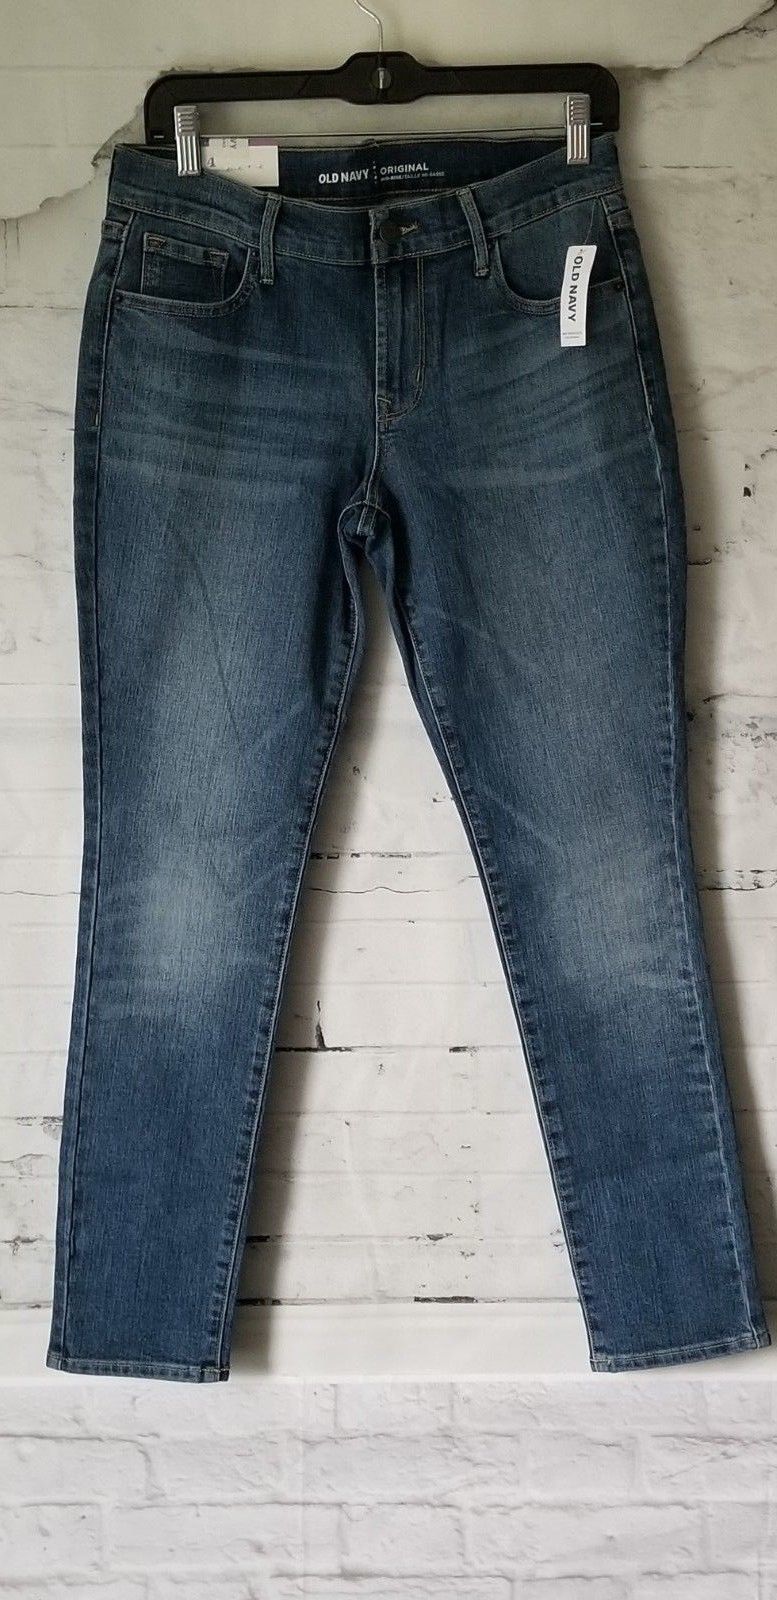 Old Navy Original Mid-Rise Jeans Women's Size 4 30x29 NEW WITH TAGS - Jeans